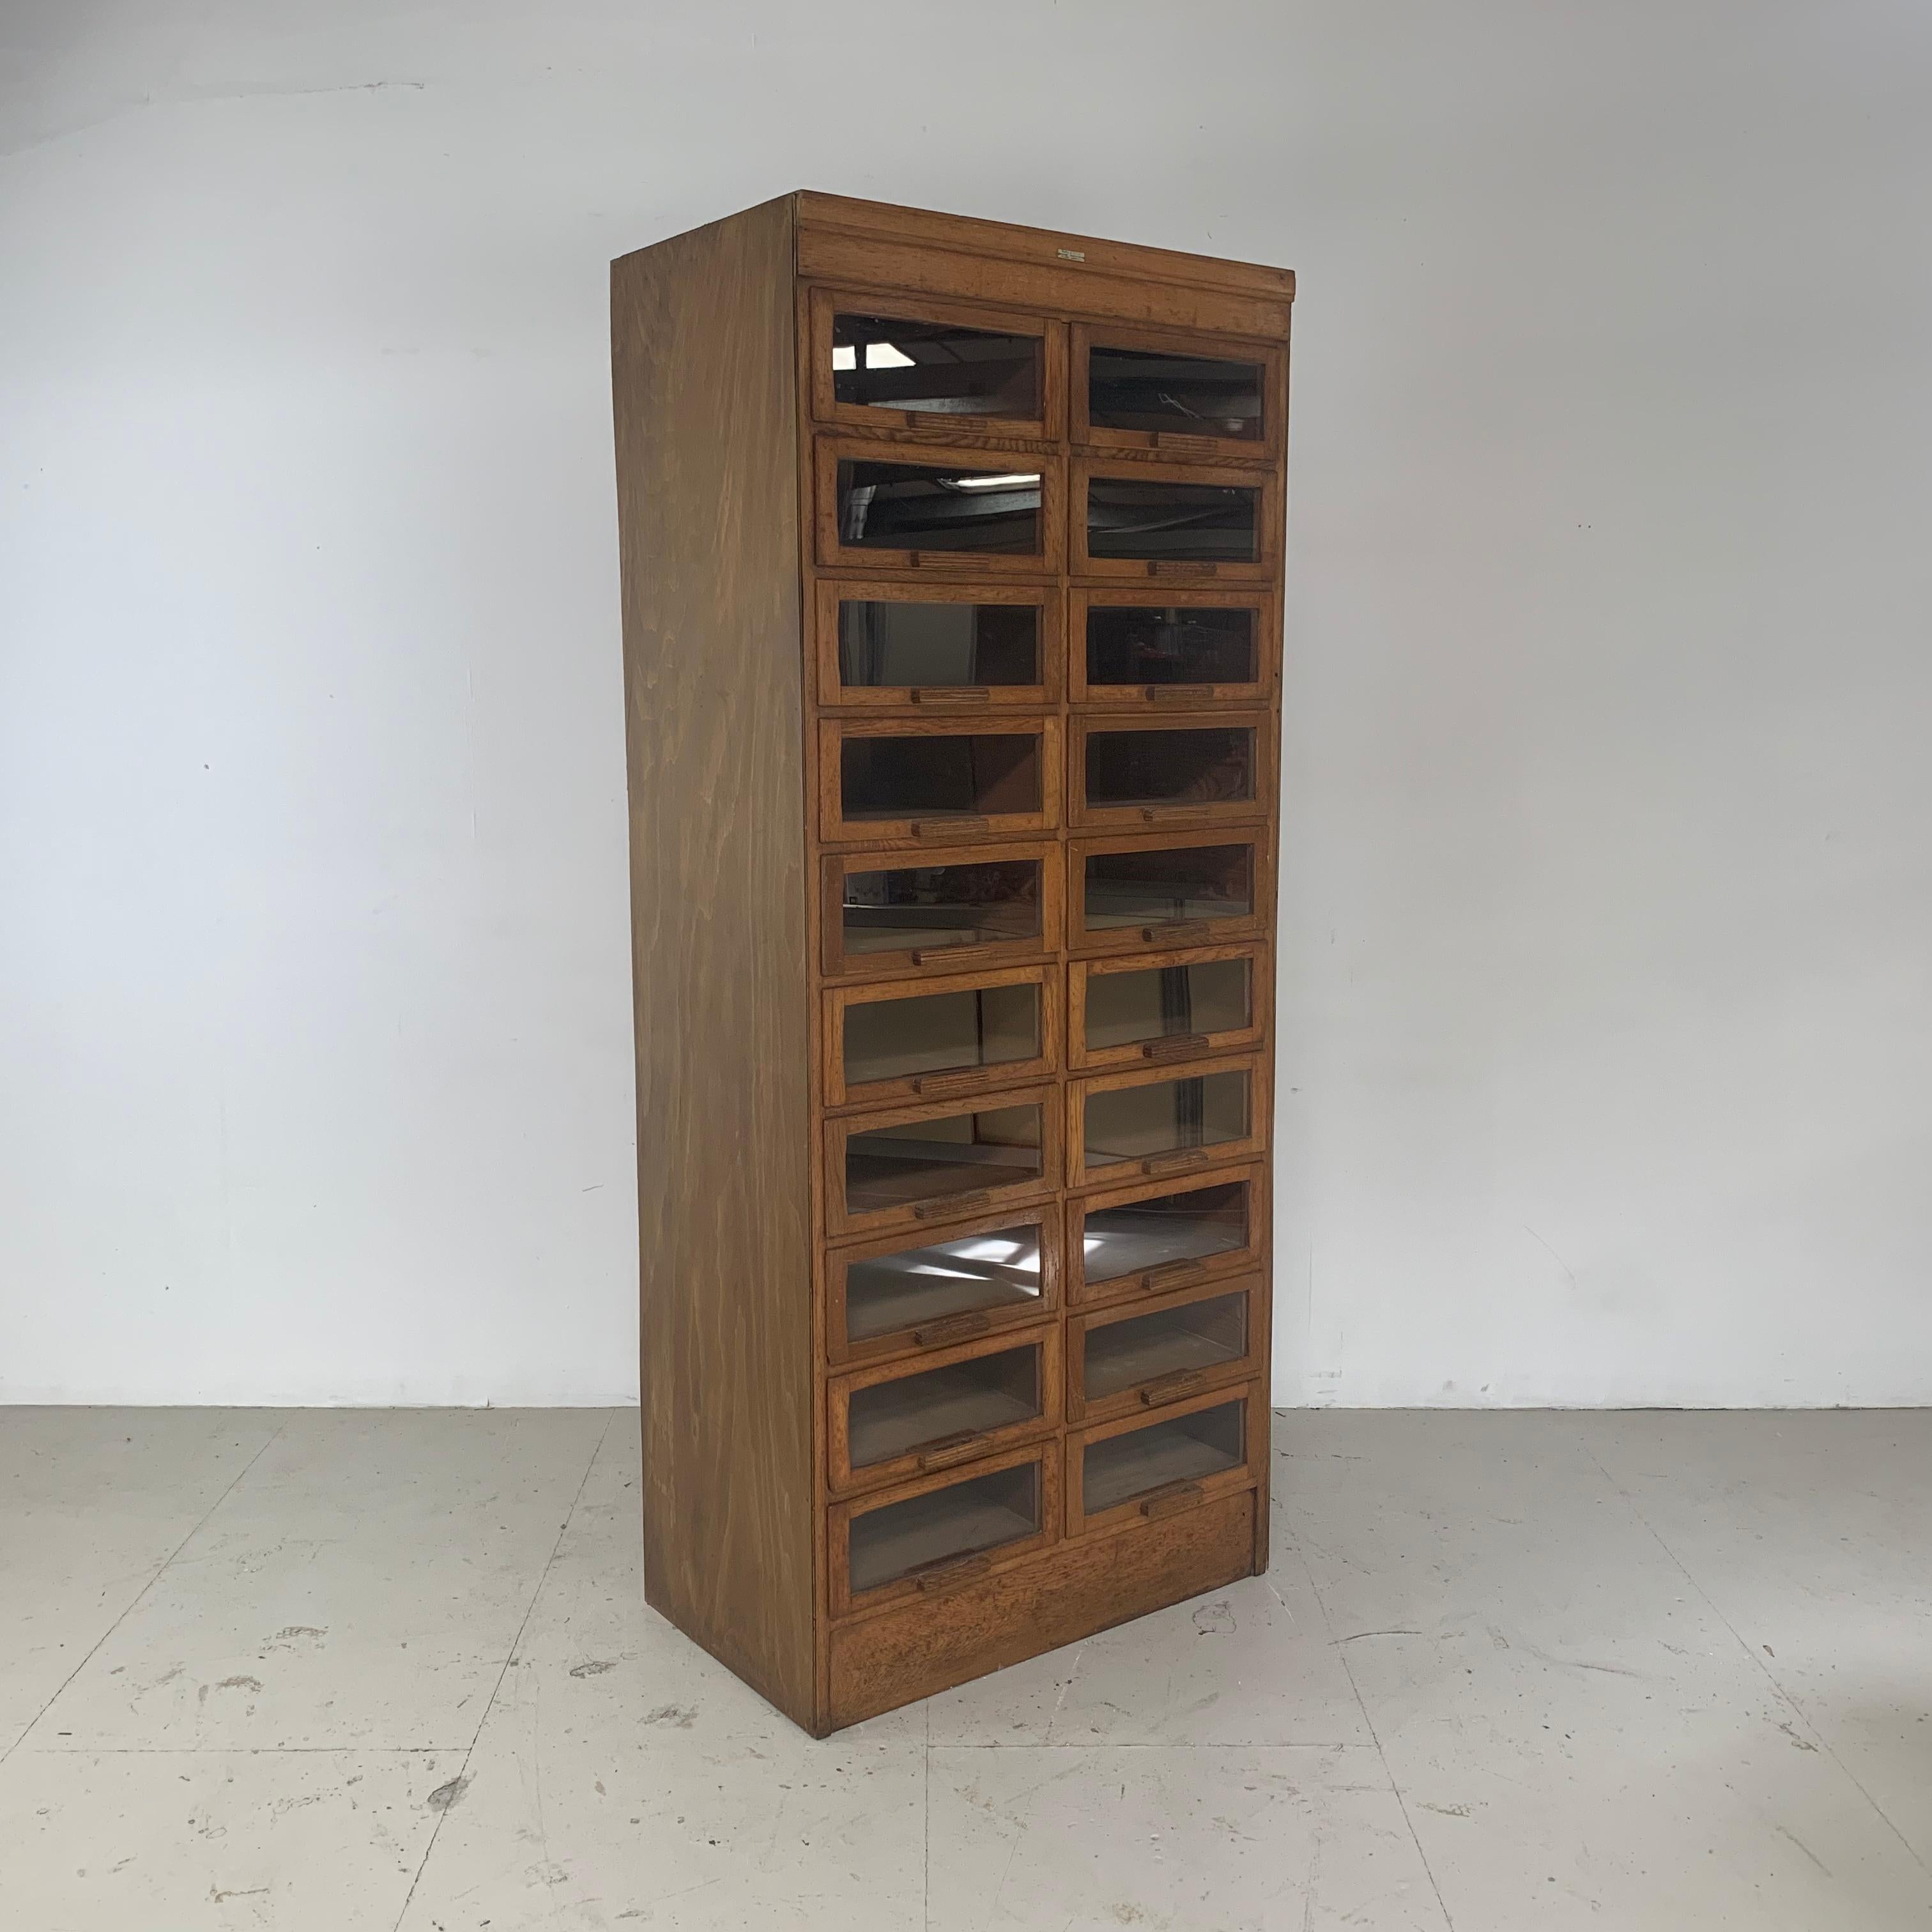 Really lovely vintage 20-drawer haberdashery shop cabinet from the 1940s-1950s with wooden handles. Made by Dudley & Co.

In good vintage condition. Some scuffs here and there, commensurate with age. It has been fully restored but please bear in